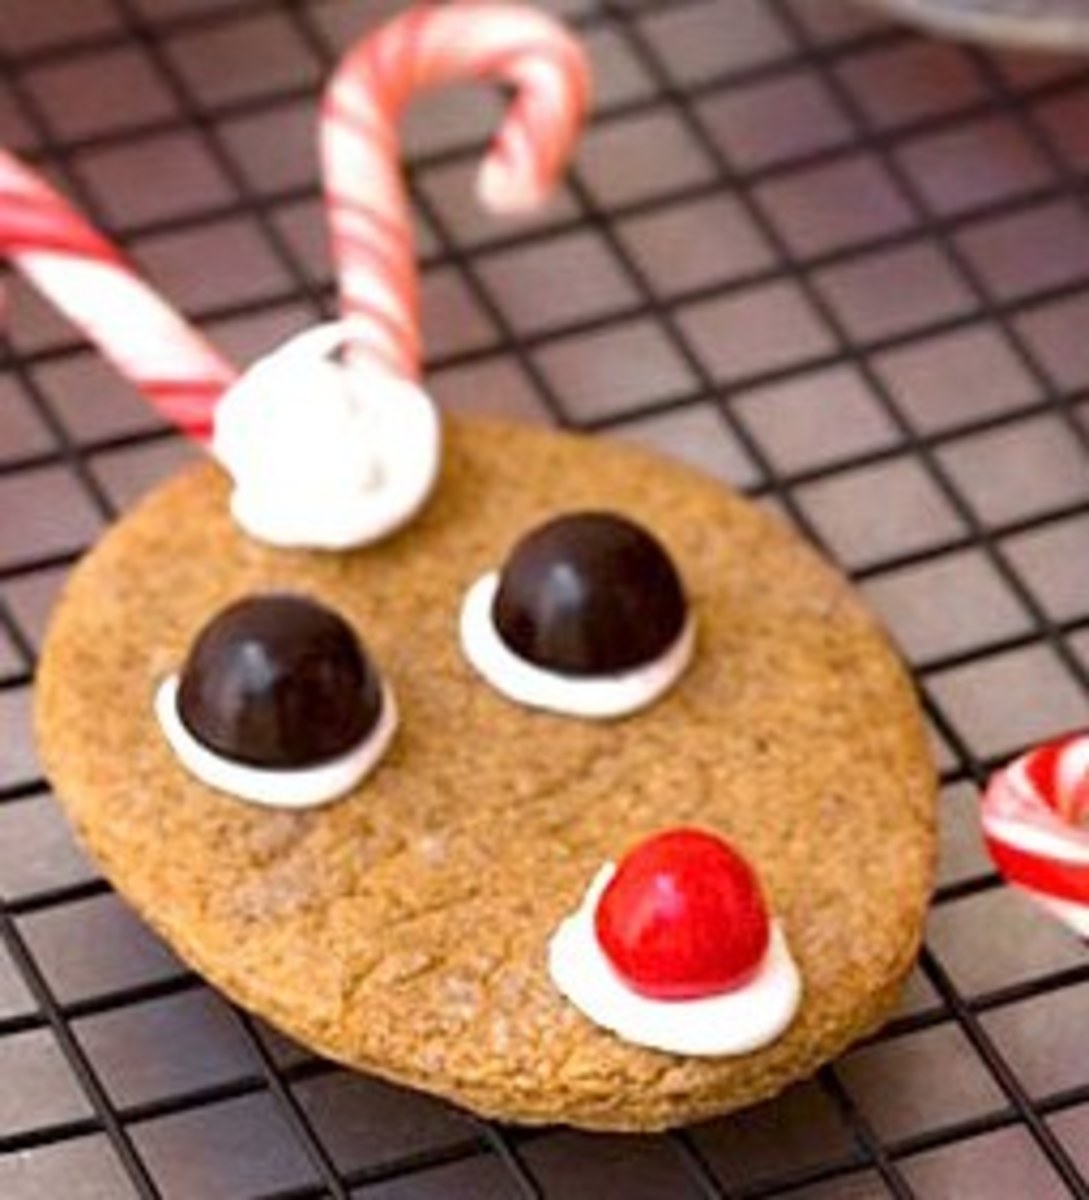 Easy Reindeer cookies made from gingersnap cookies. Icing holds on the chocolate candy eyes, nose and peppermint candy cane antlers.